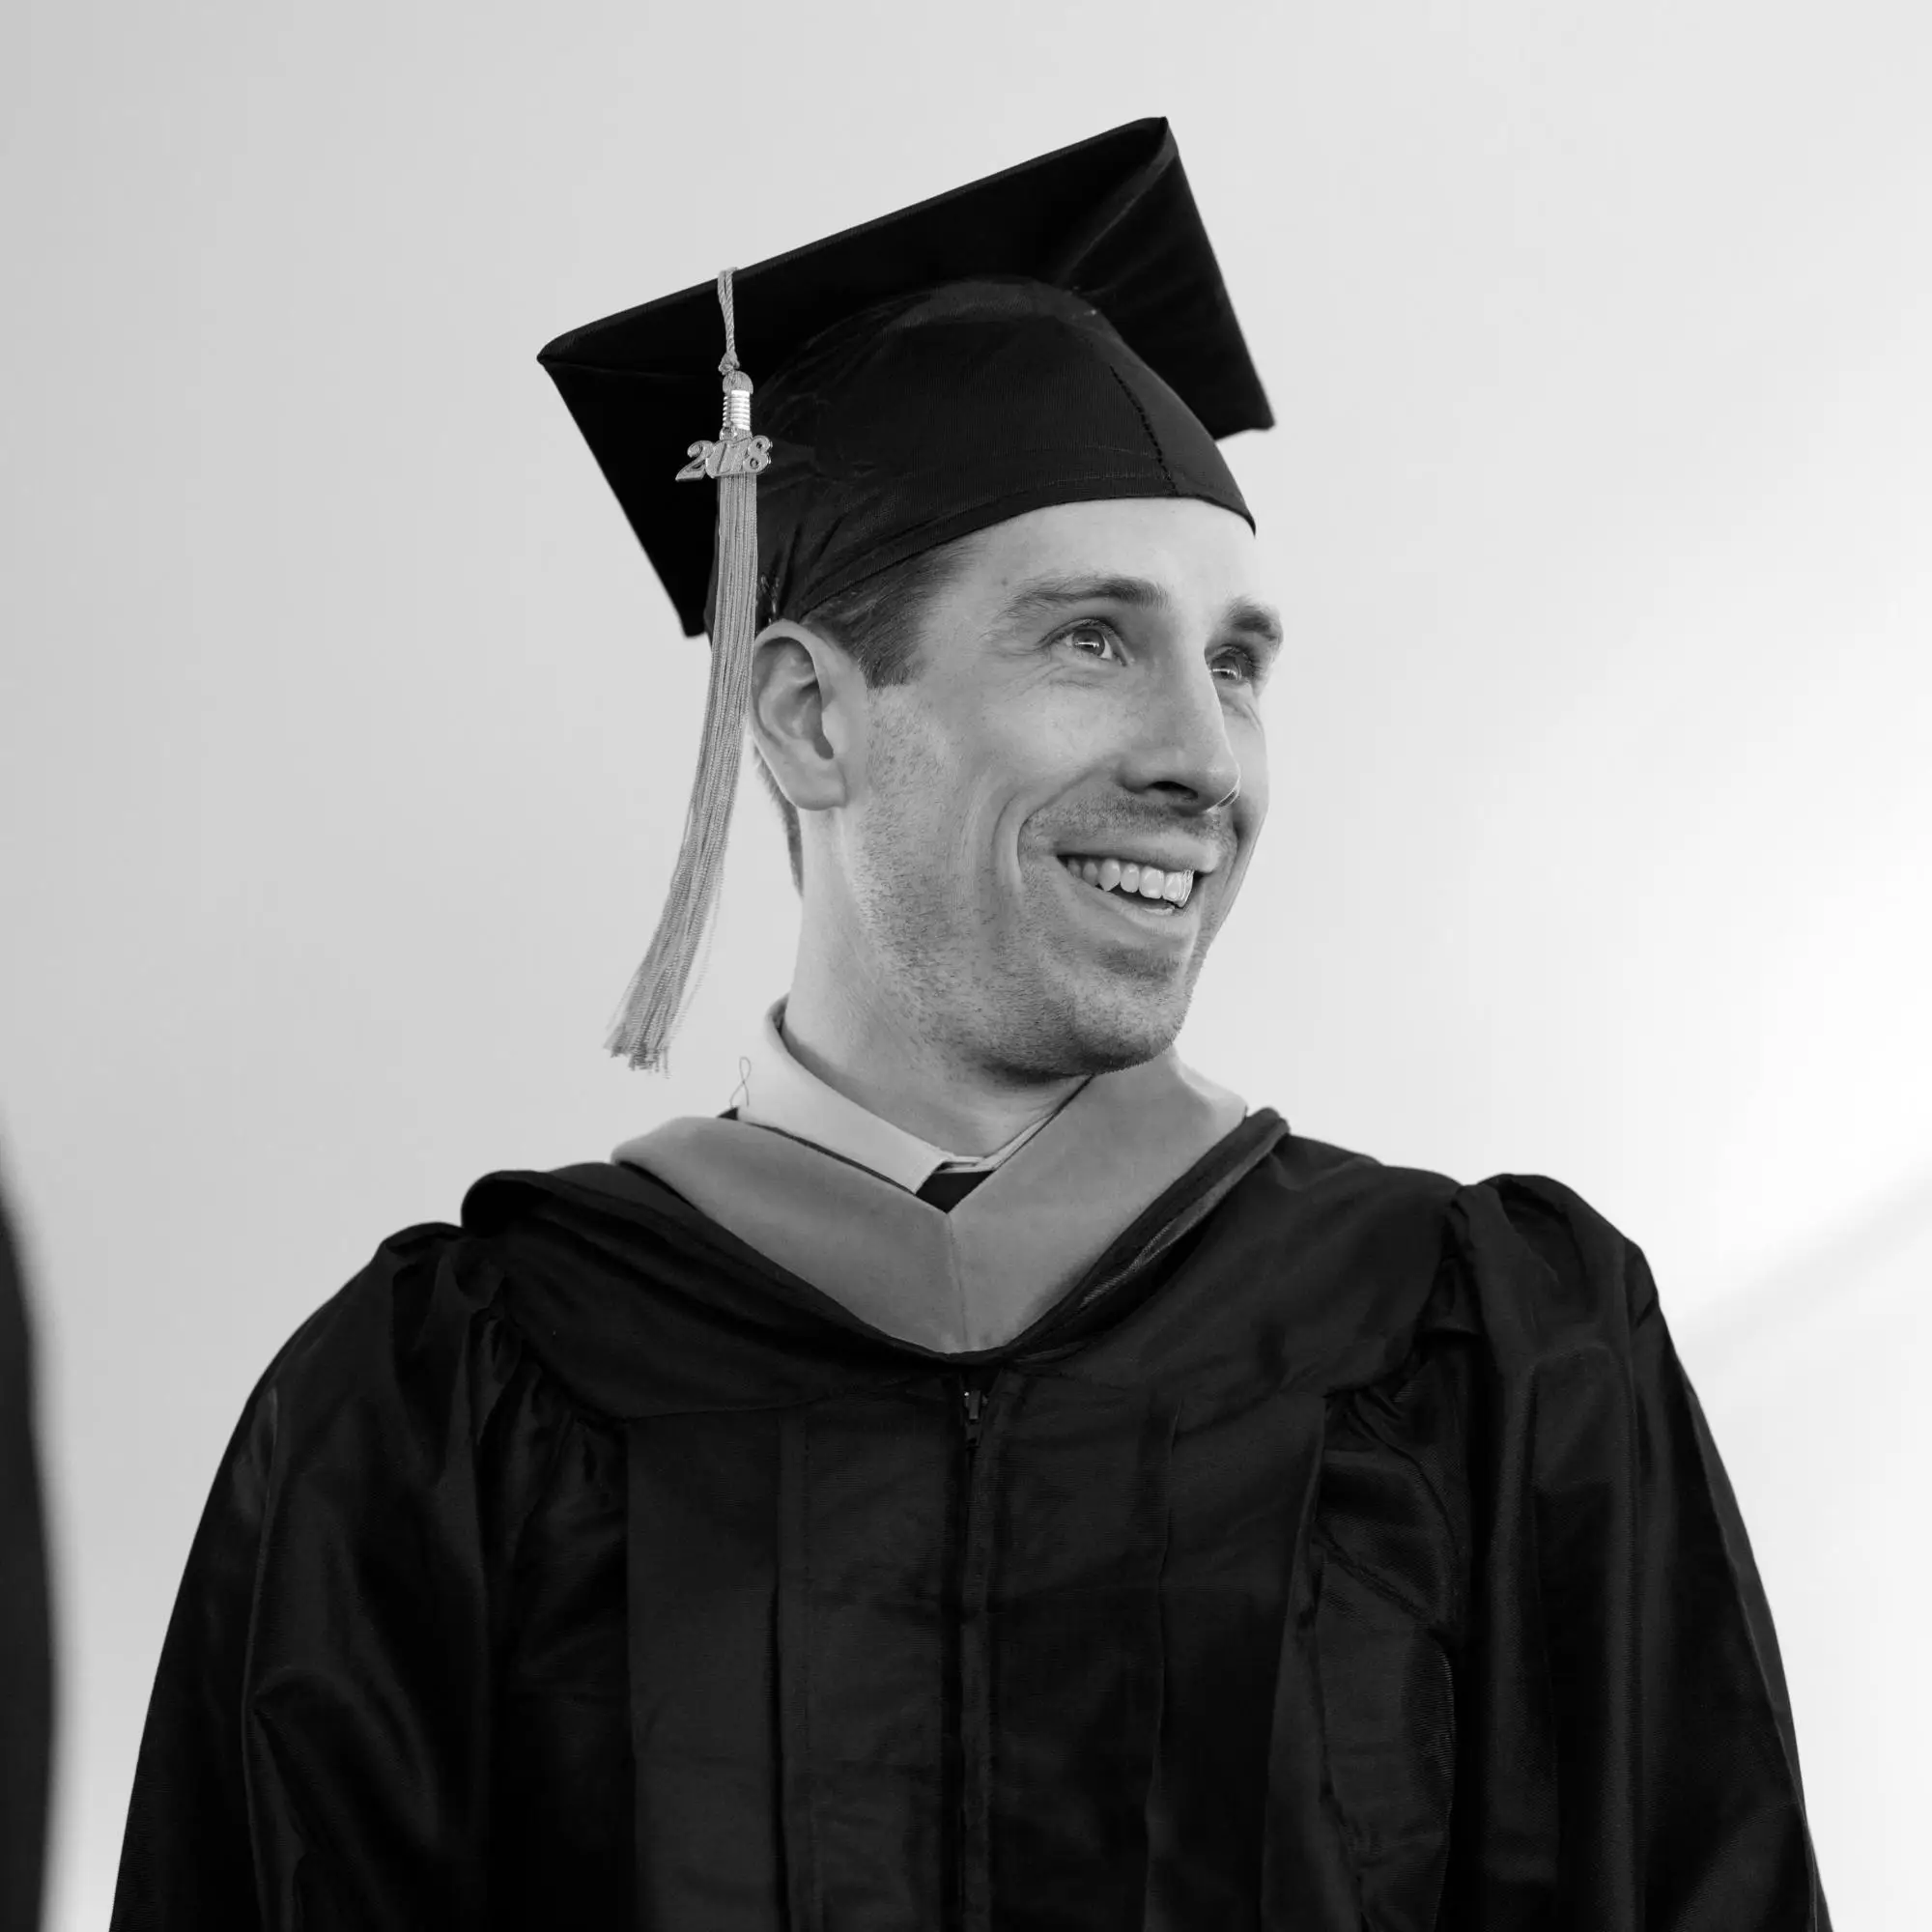 A black and white photo of a young man wearing graduation regalia smiling to the side.